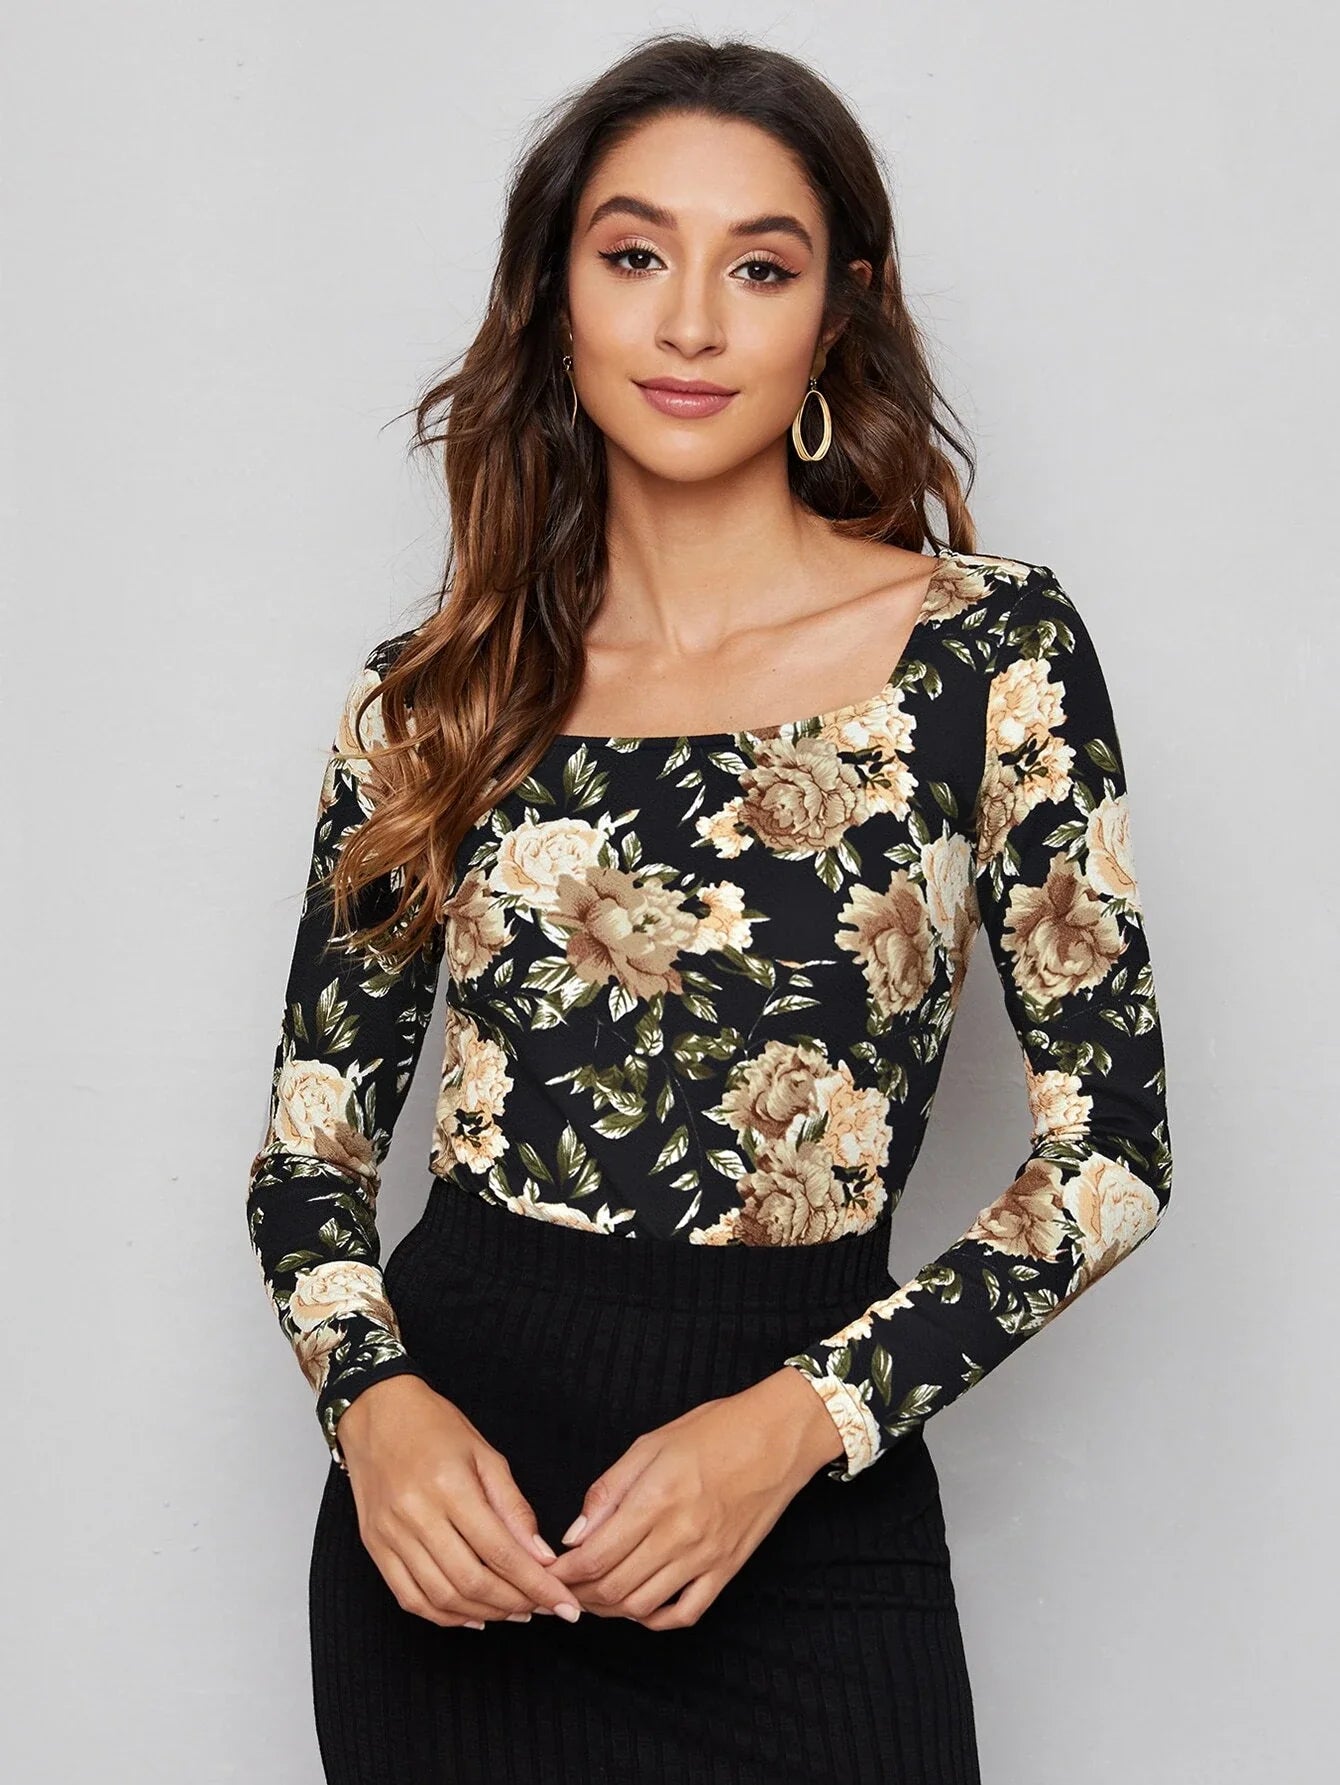 Buy Shein Emery Rose Square Neck Floral Print Tee in Pakistan